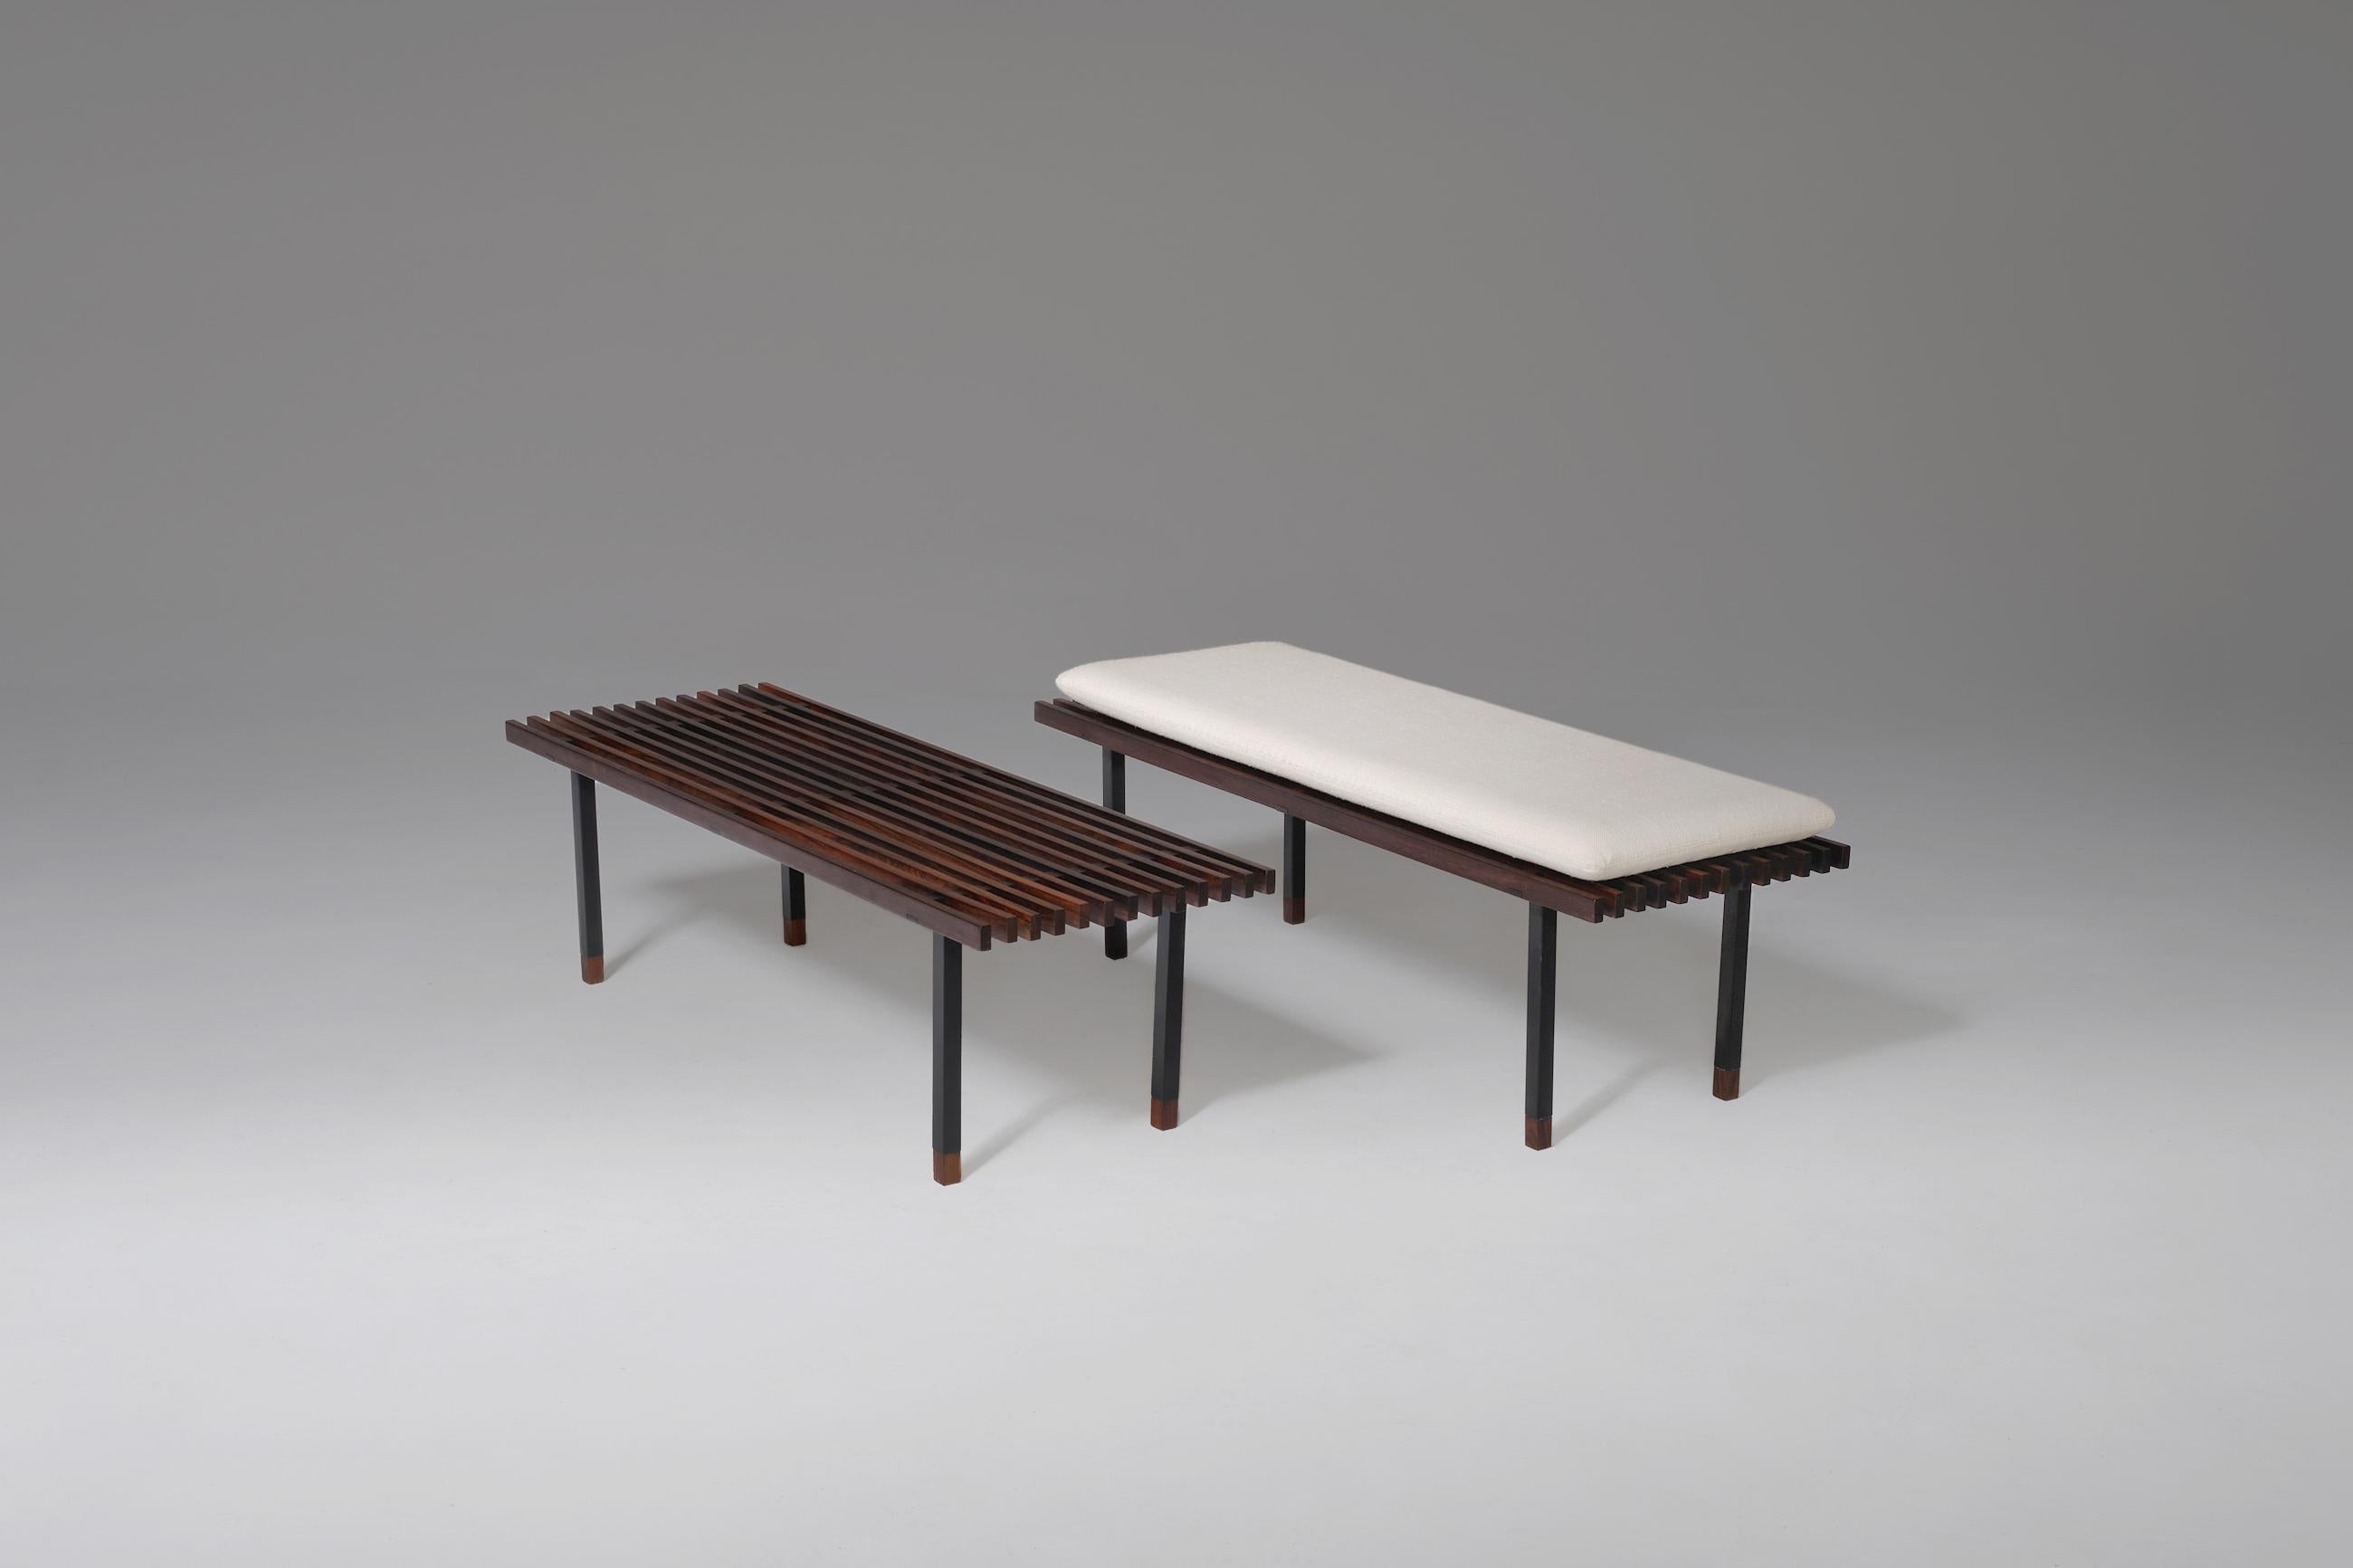 Rare pair of benches by Franco Campo & Carlo Graffi, Italy, 1950s. Made of beautiful solid rosewood slats and a nice black lacquered metal frame. Can be used as a pair of benches but is also beautiful as a side - or coffee tables. Provided with one